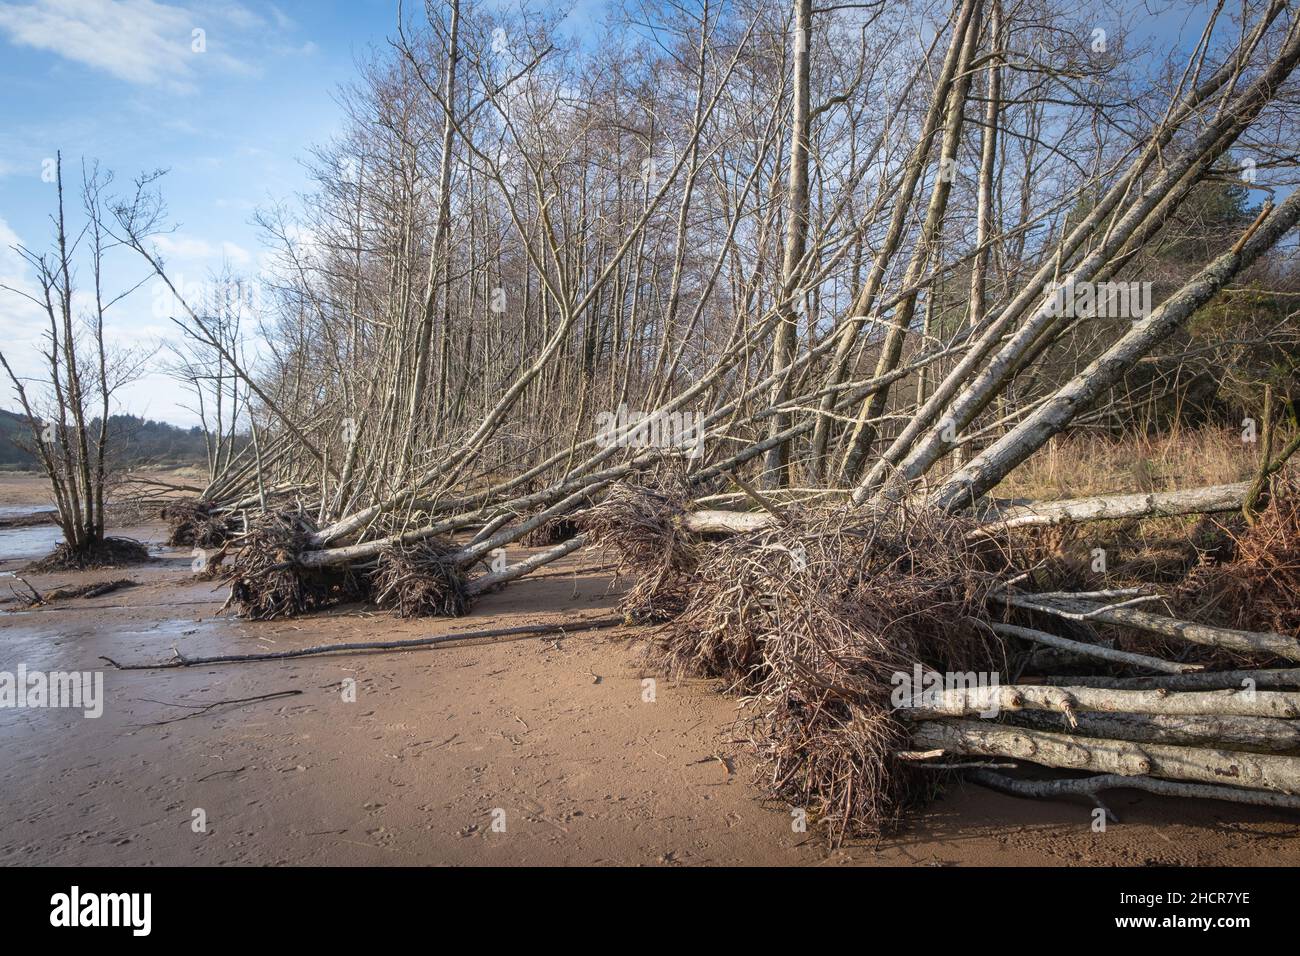 A row of trees shows the impact of storm damage at Sandyhills beach, Dumfries and Galloway, Scotland. Stock Photo